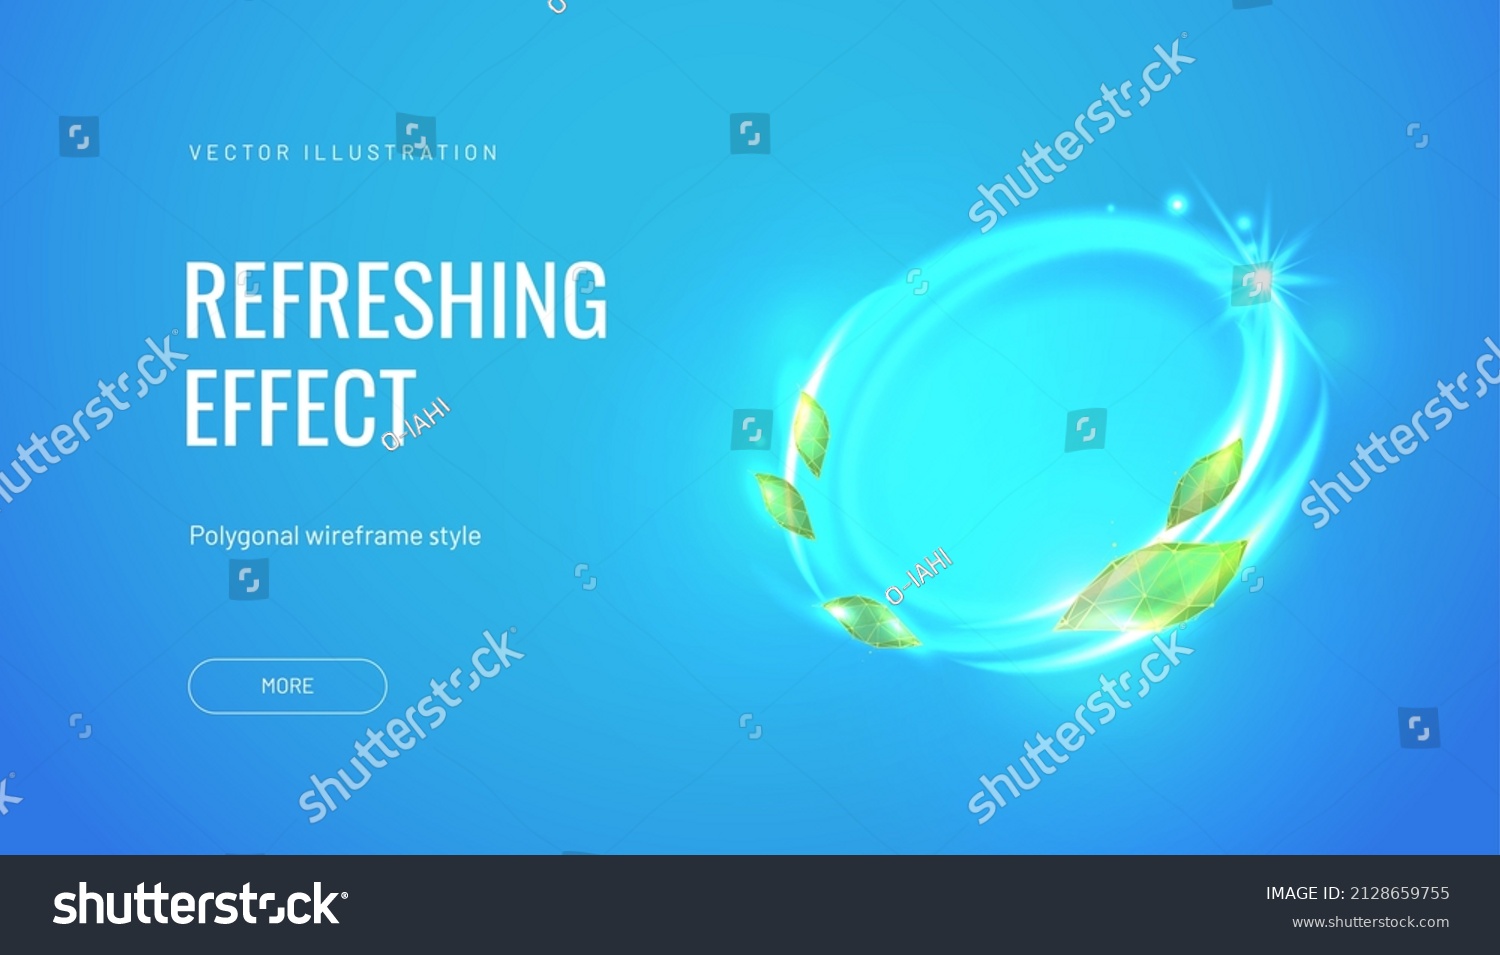 Light fresh effect on blue background. Element for fresheners, cleaners, giving menthol aroma. Air flow from mint leaves. Vector illustration #2128659755